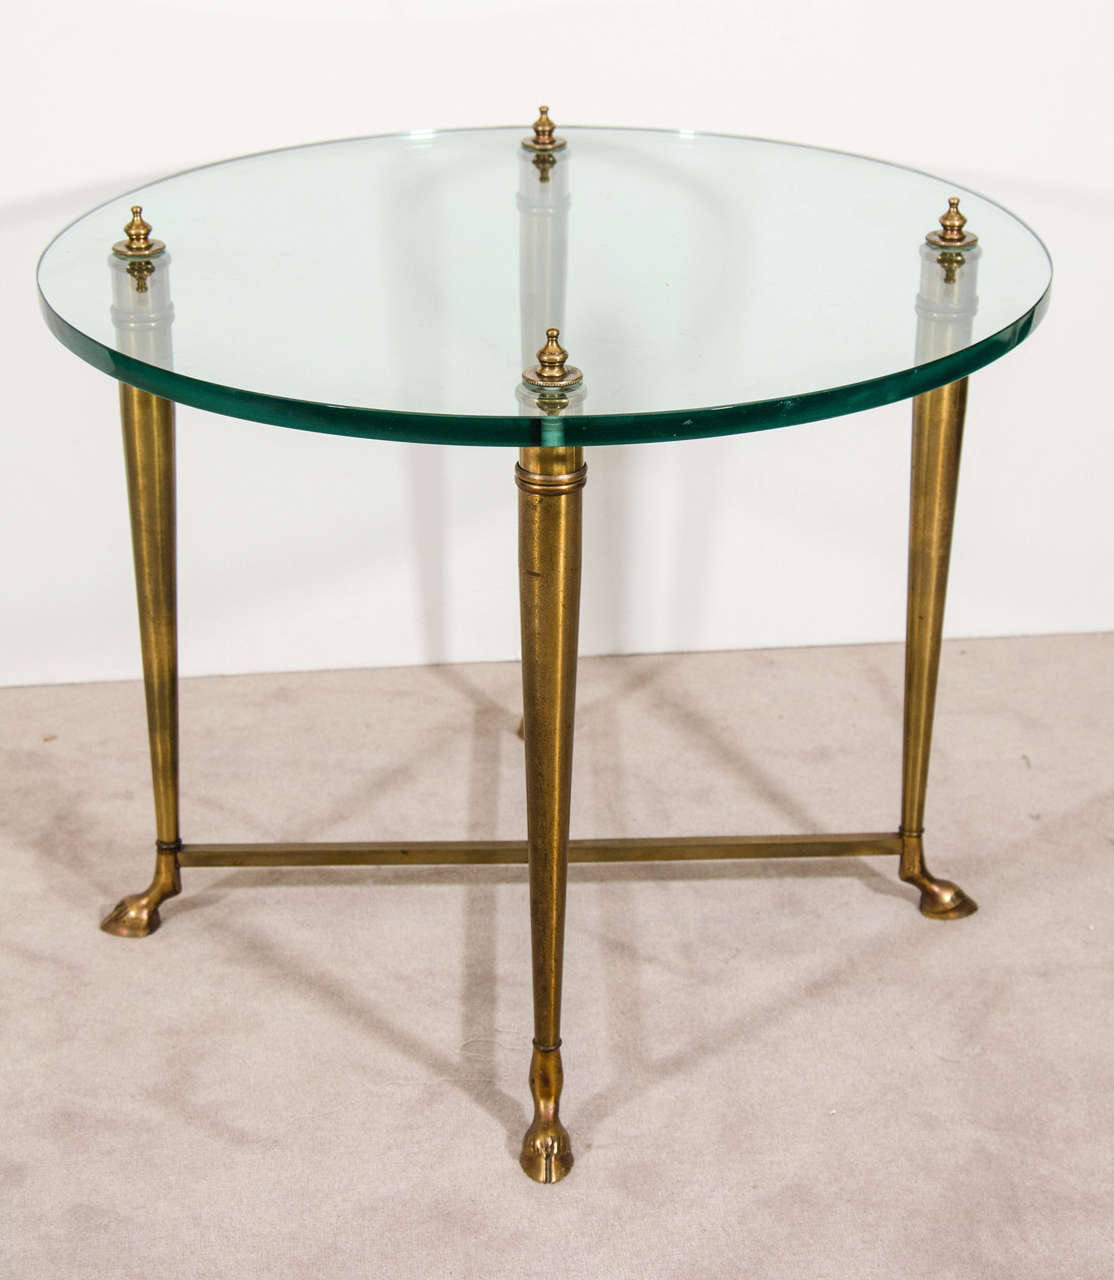 Vintage Maison Jansen style brass and glass side or end table with four finials detailing the 1